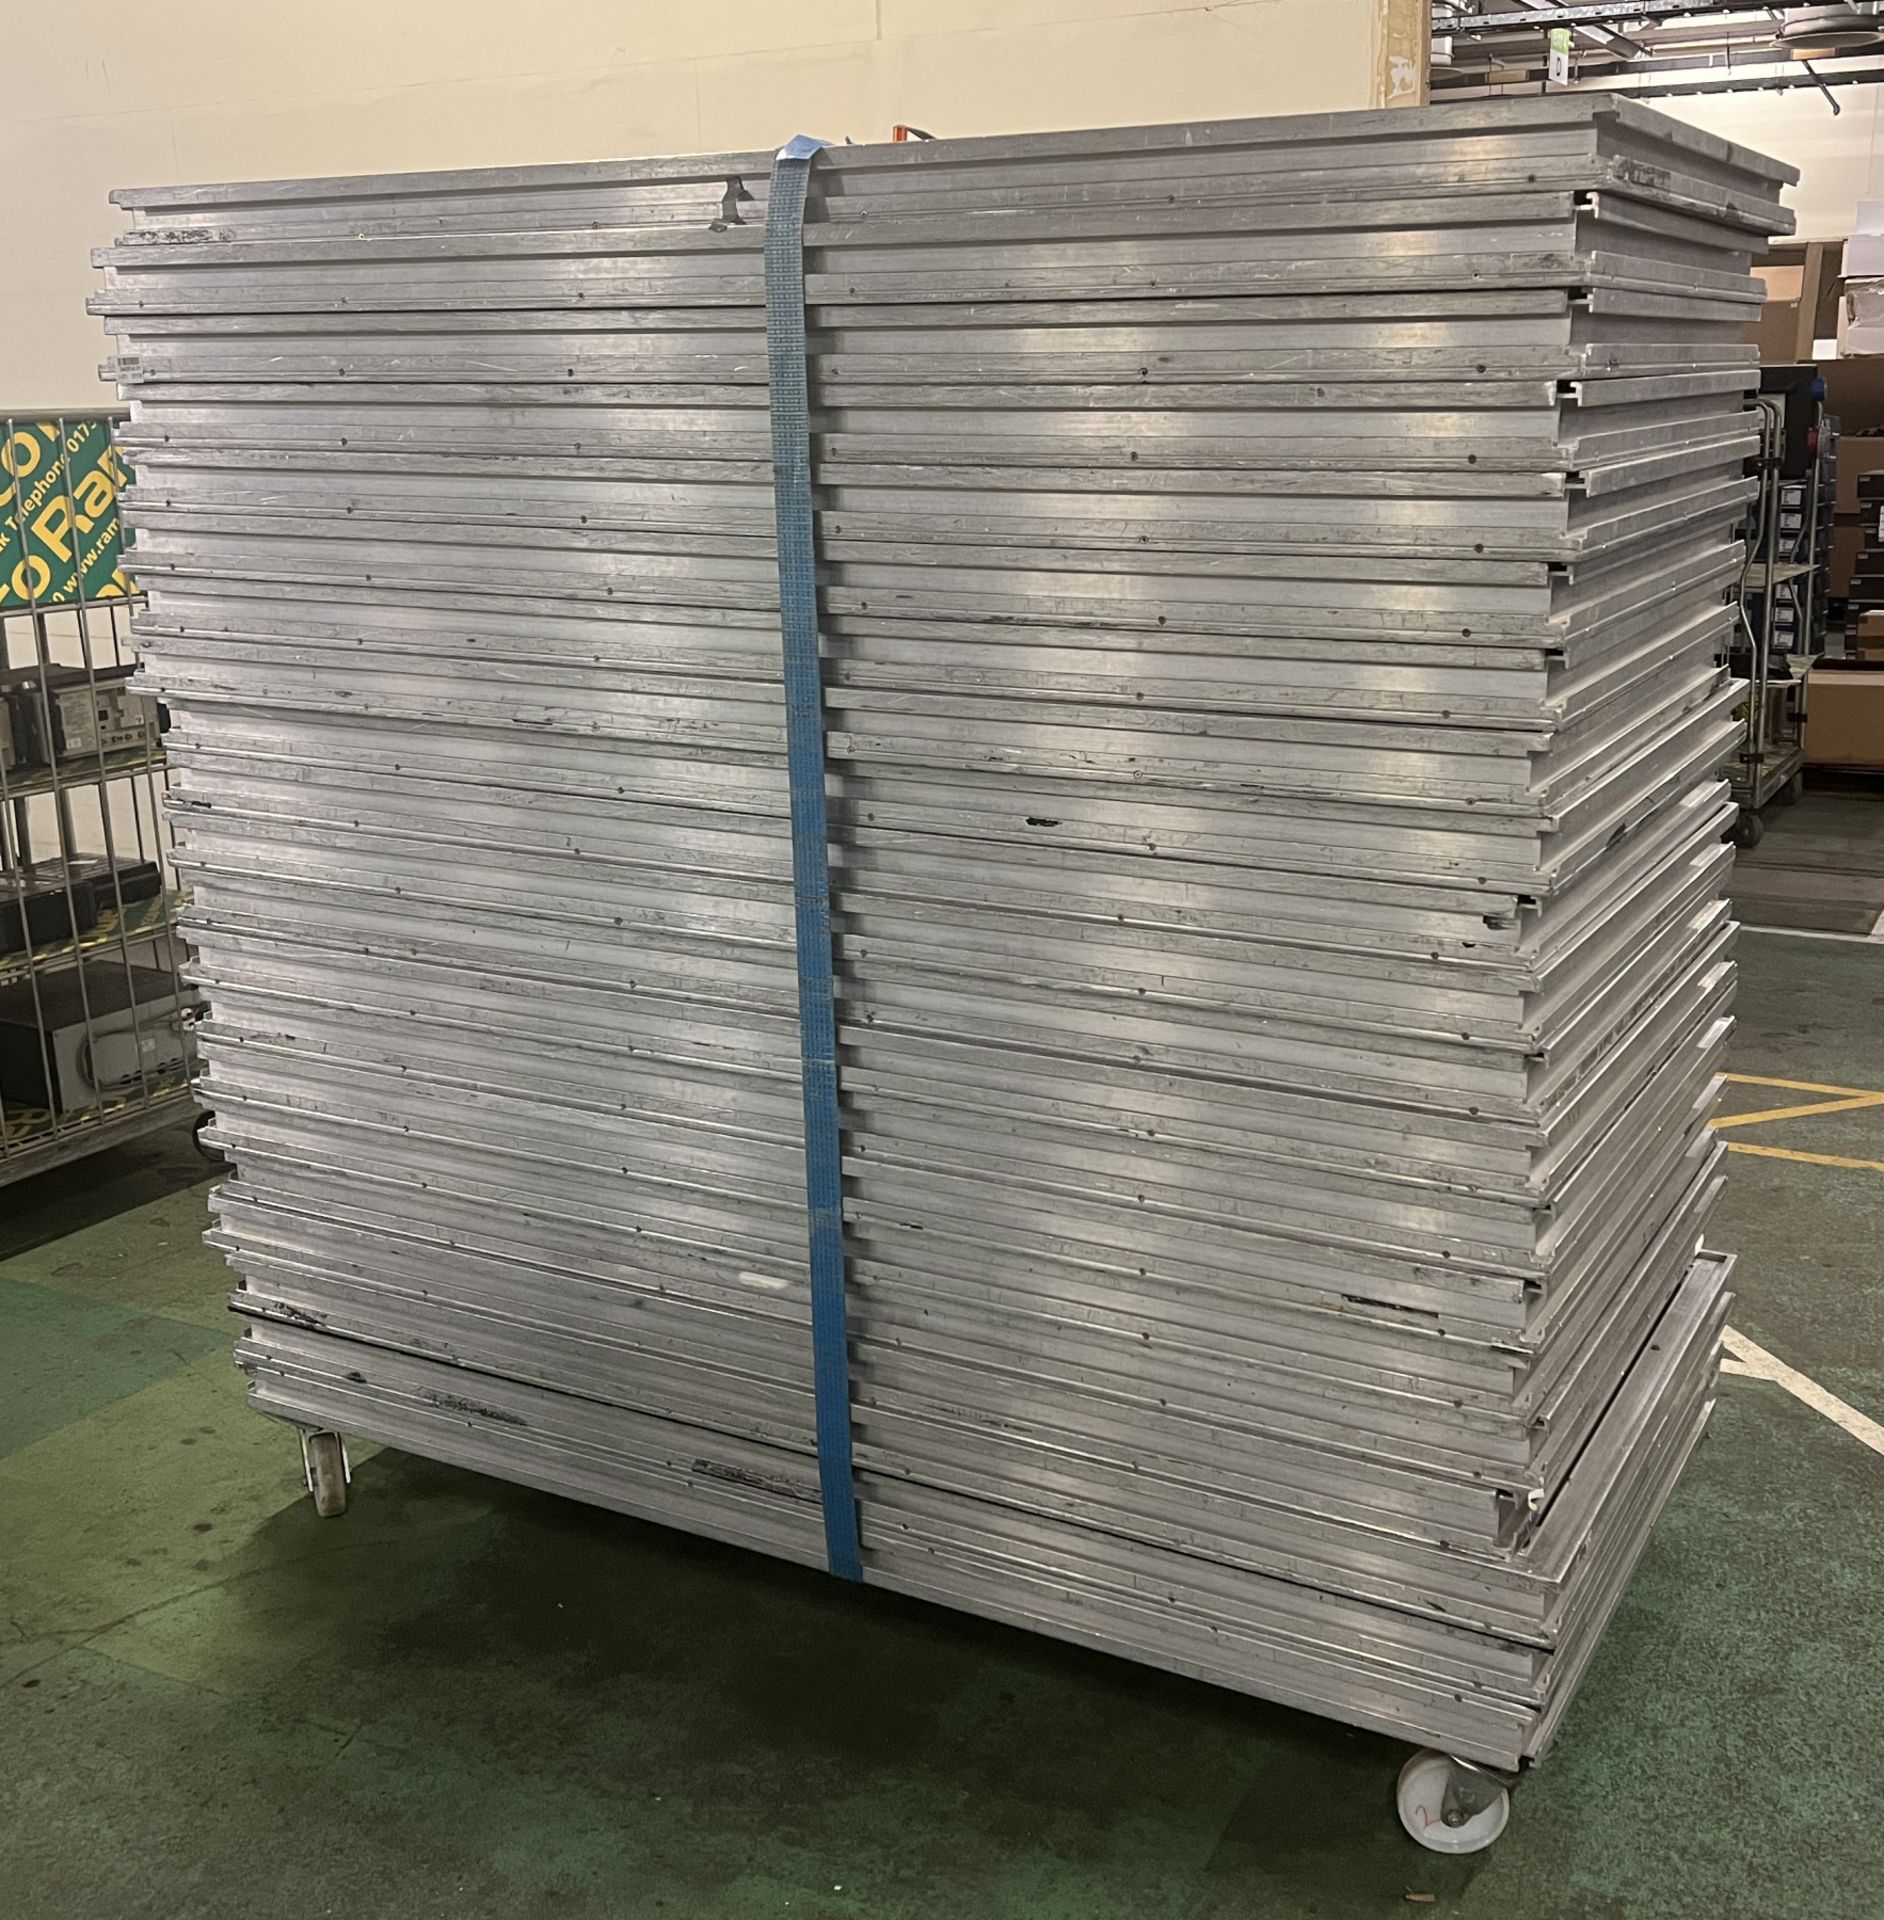 21x Aluminium stage/platform deck sections - W 2000 x D 1000 x H 85mm per section - NO STANDS/FEET